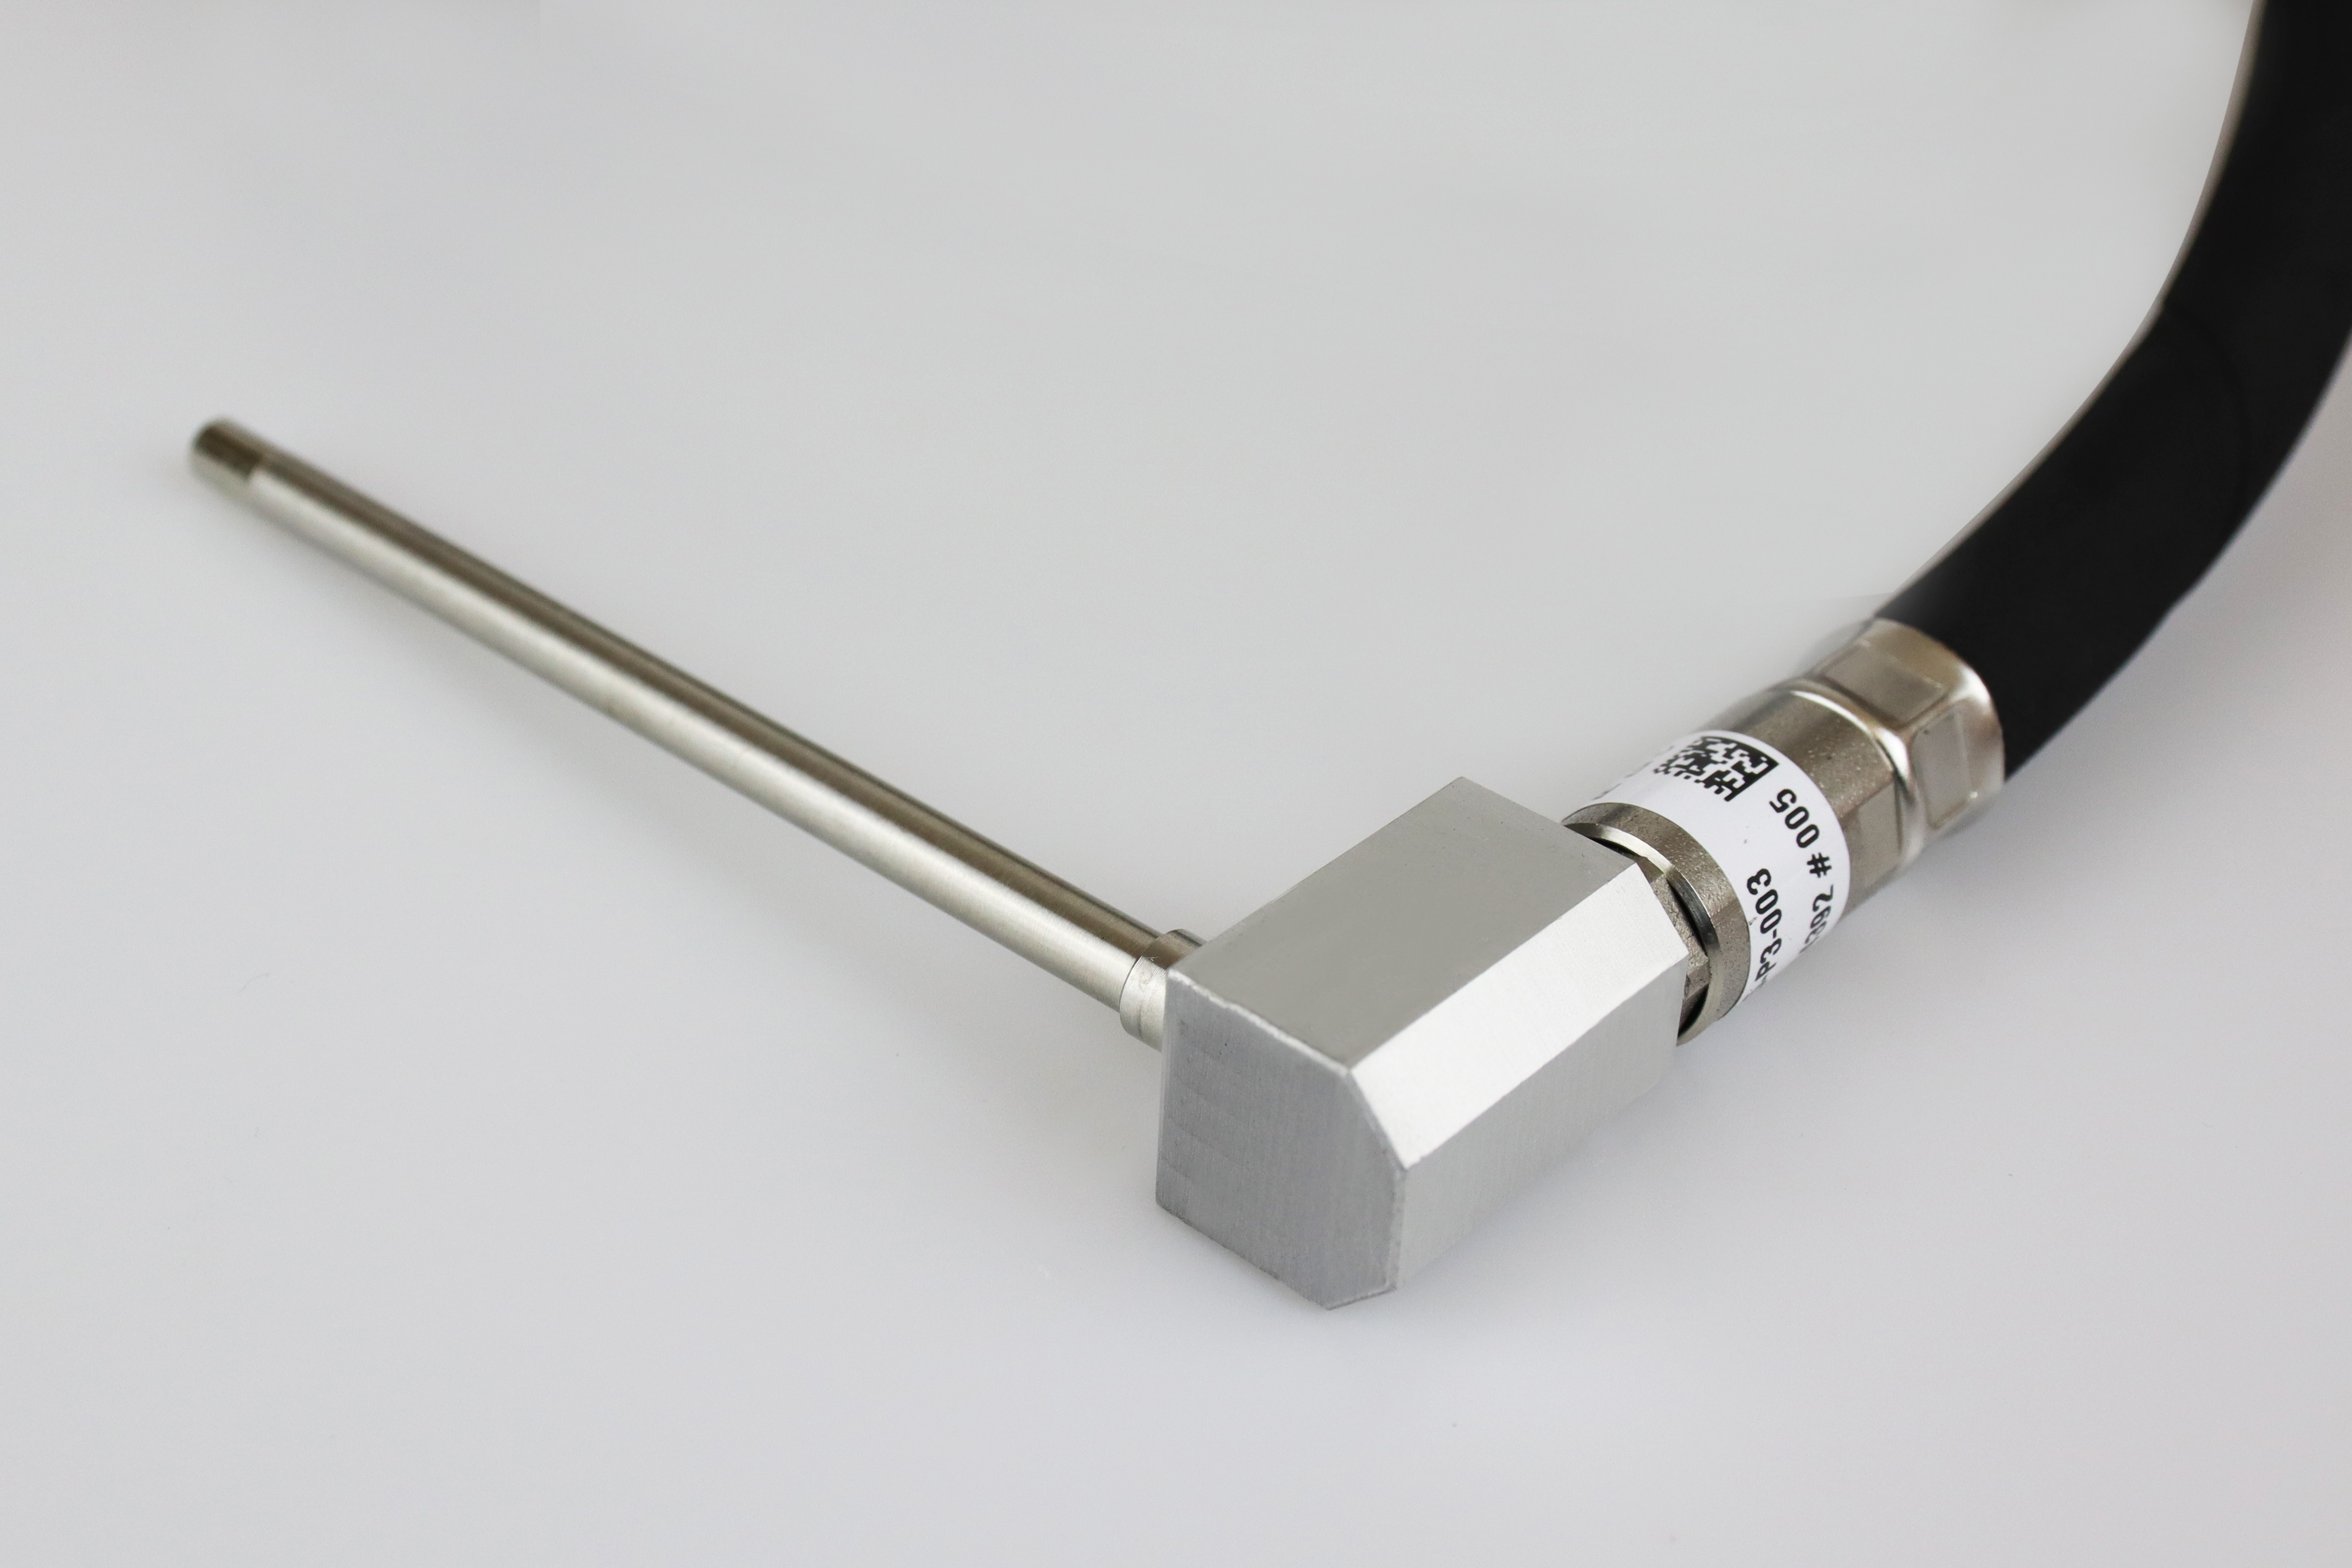 The image shows a tailor-made temperature sensor on a grey background